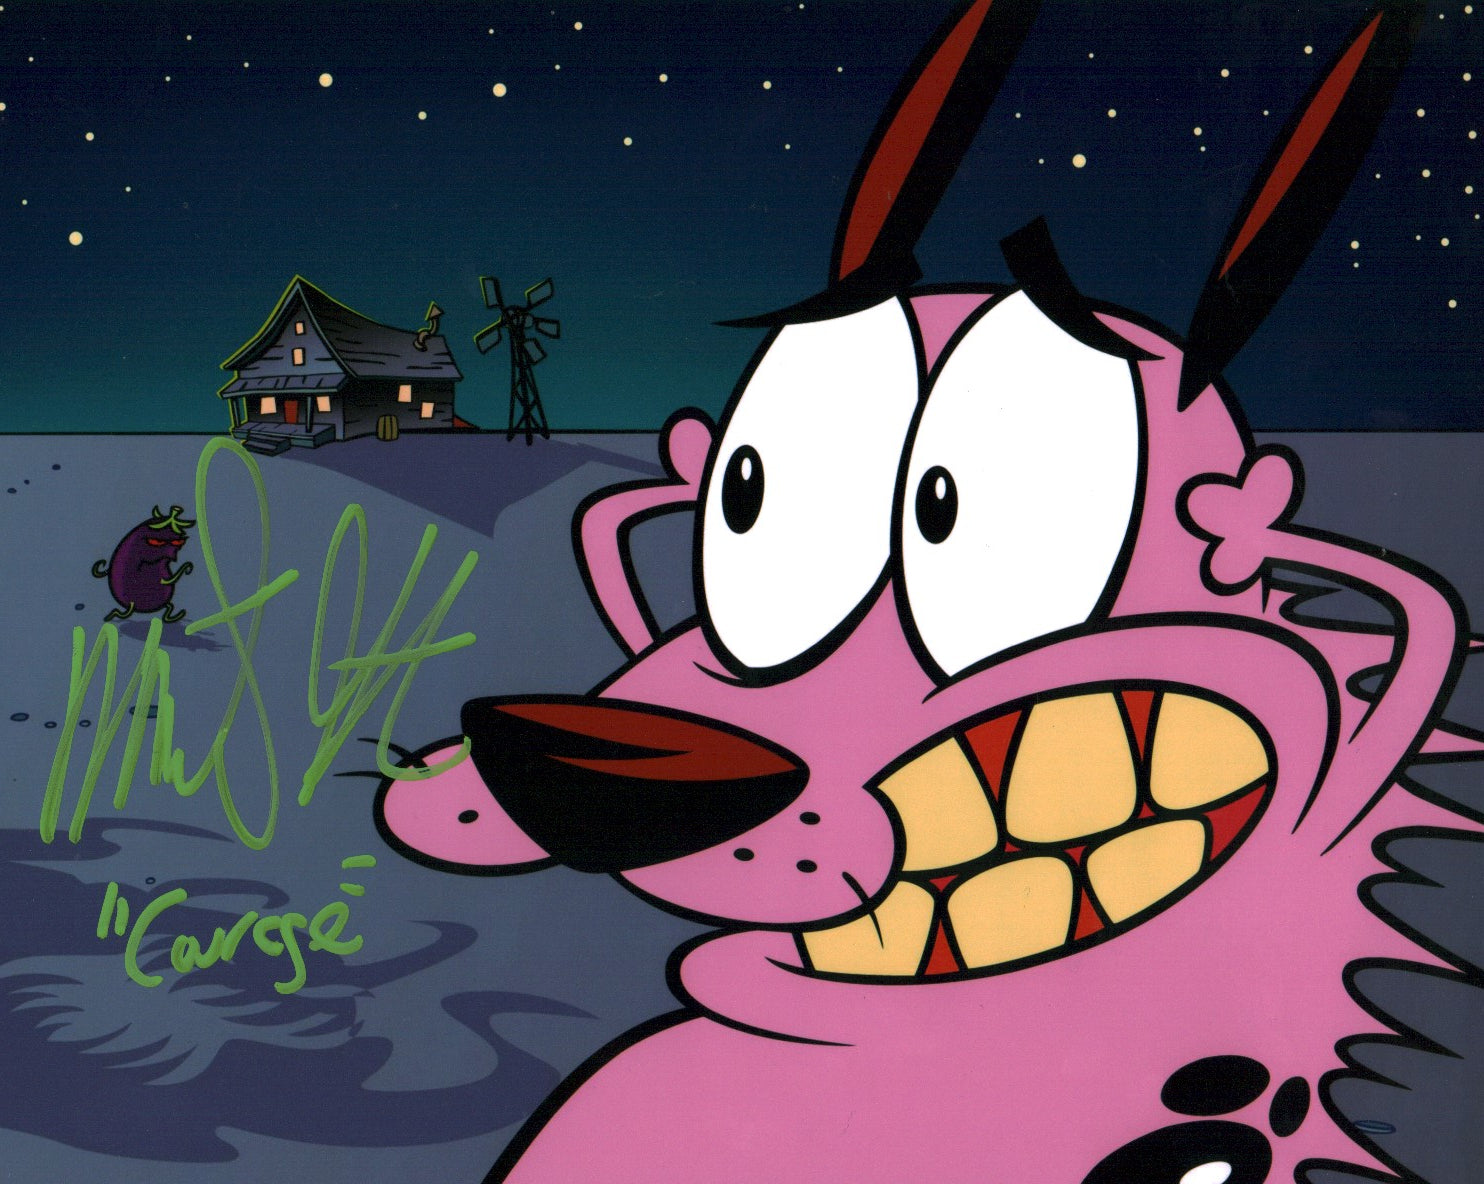 Marty Grabstein Courage the Cowardly Dog 8x10 Signed Photo JSA COA Certified Autograph GalaxyCon